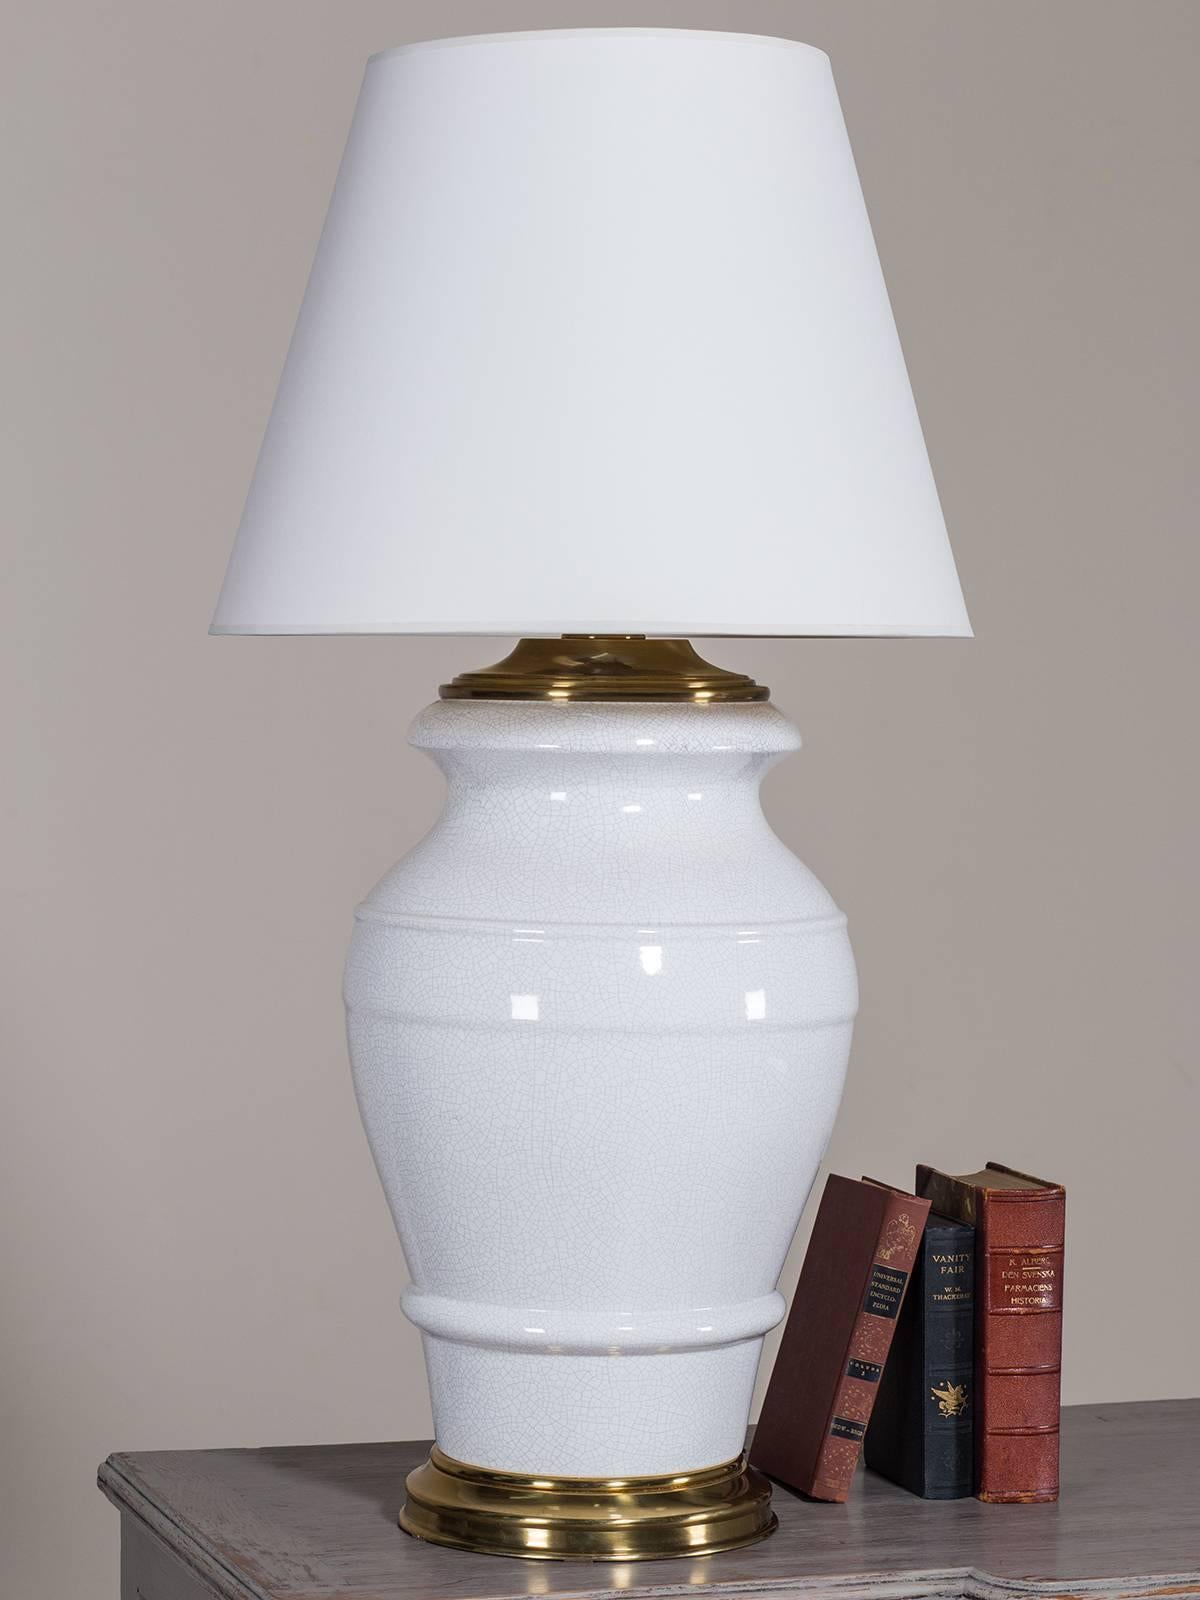 Receive our new selections direct from 1stdibs by email each week. Please click Follow Dealer below and see them first!

This marvelously over scaled porcelain lamp was made by the Paul Hanson Lamp Company and dates from the 1950s. Please enlarge